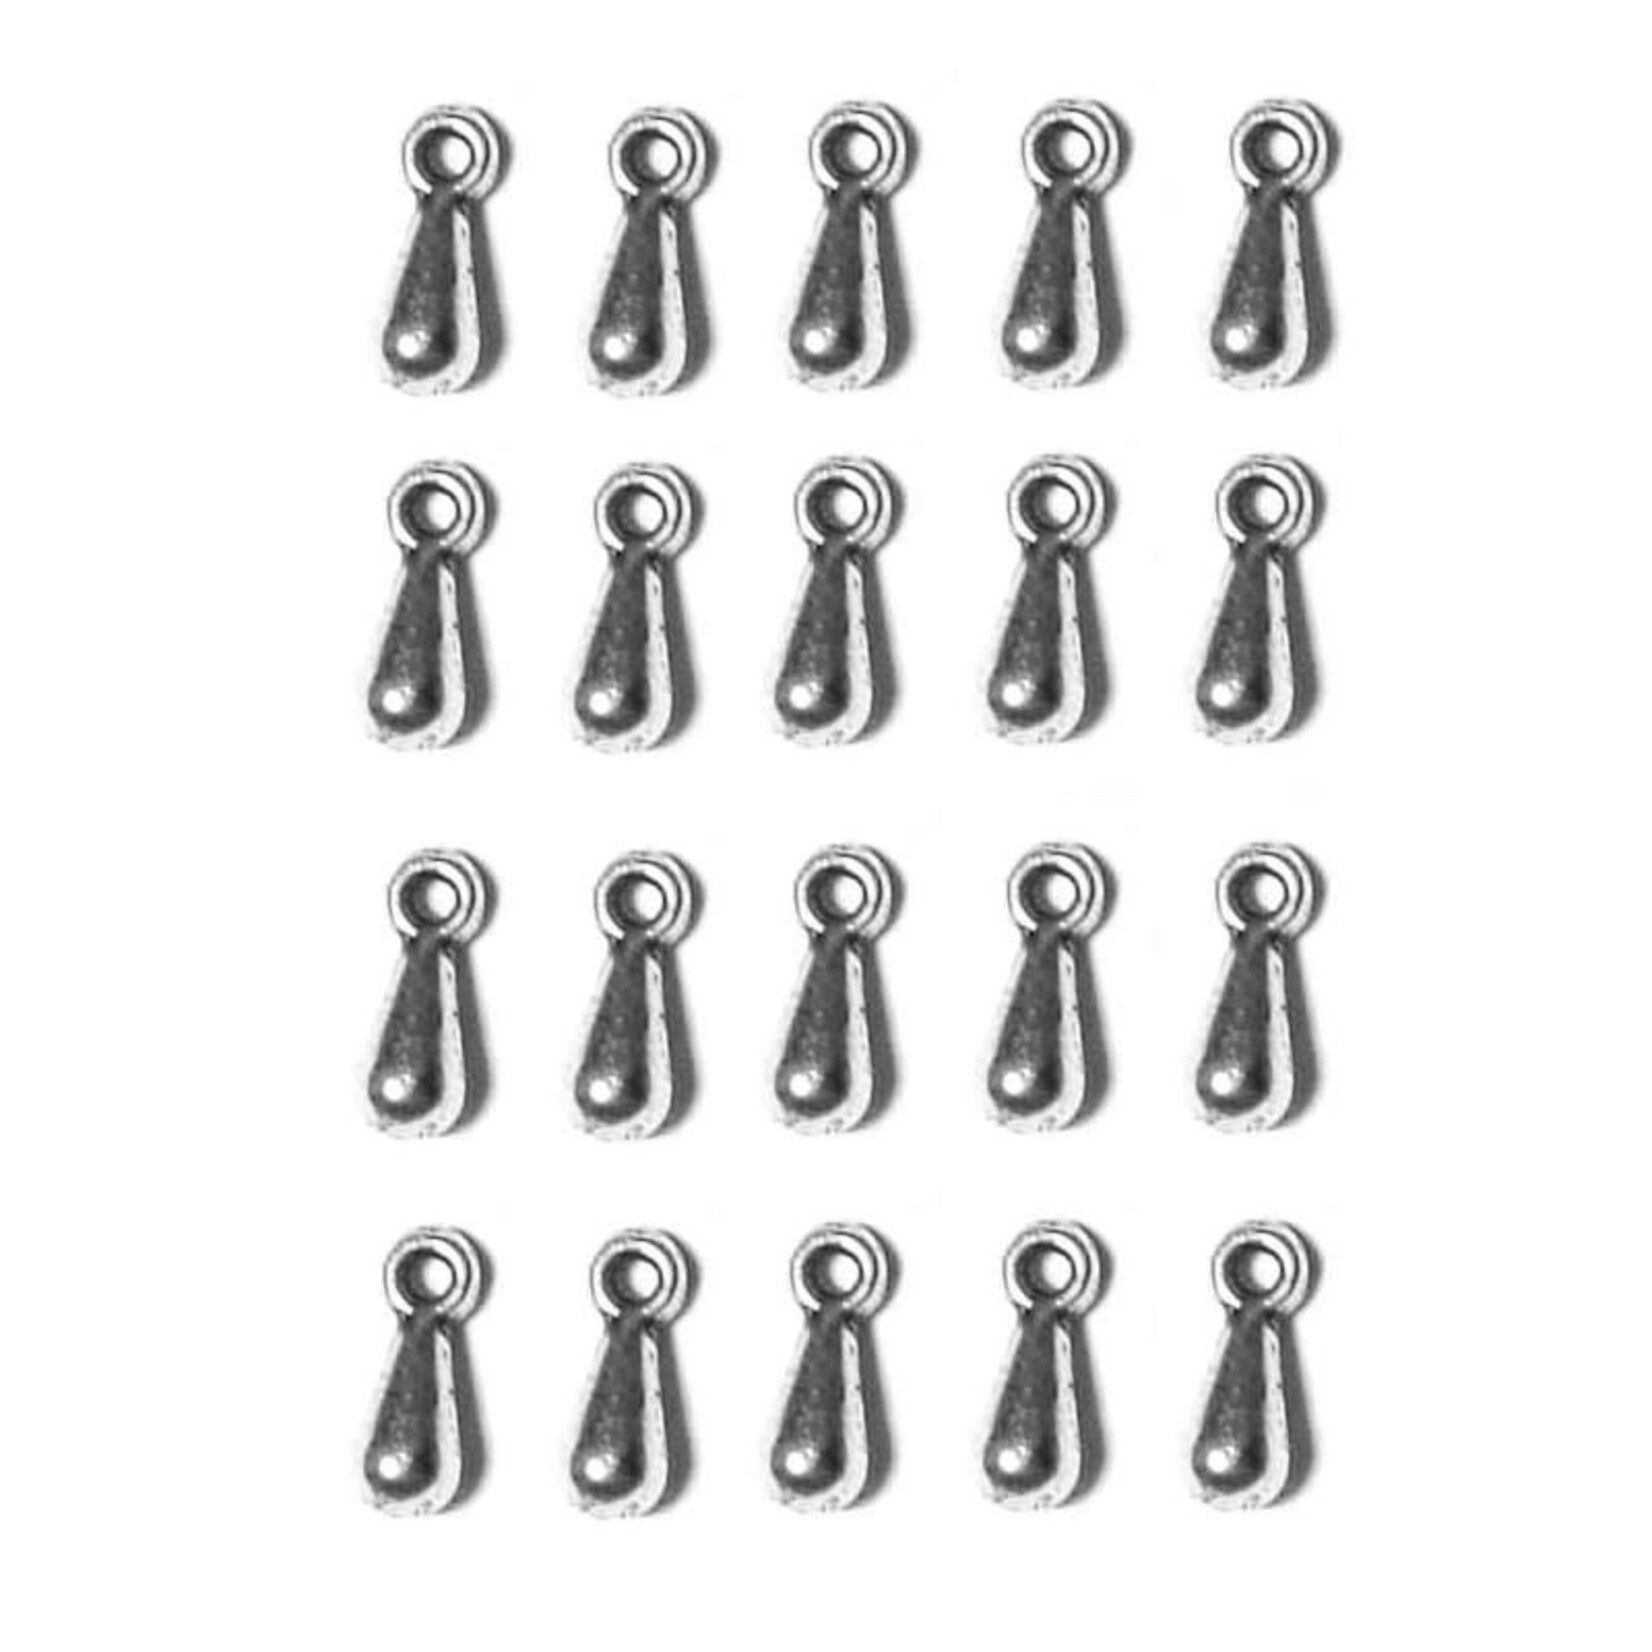 Teardrop Small 7mm Pewter Charm - 20 Pieces